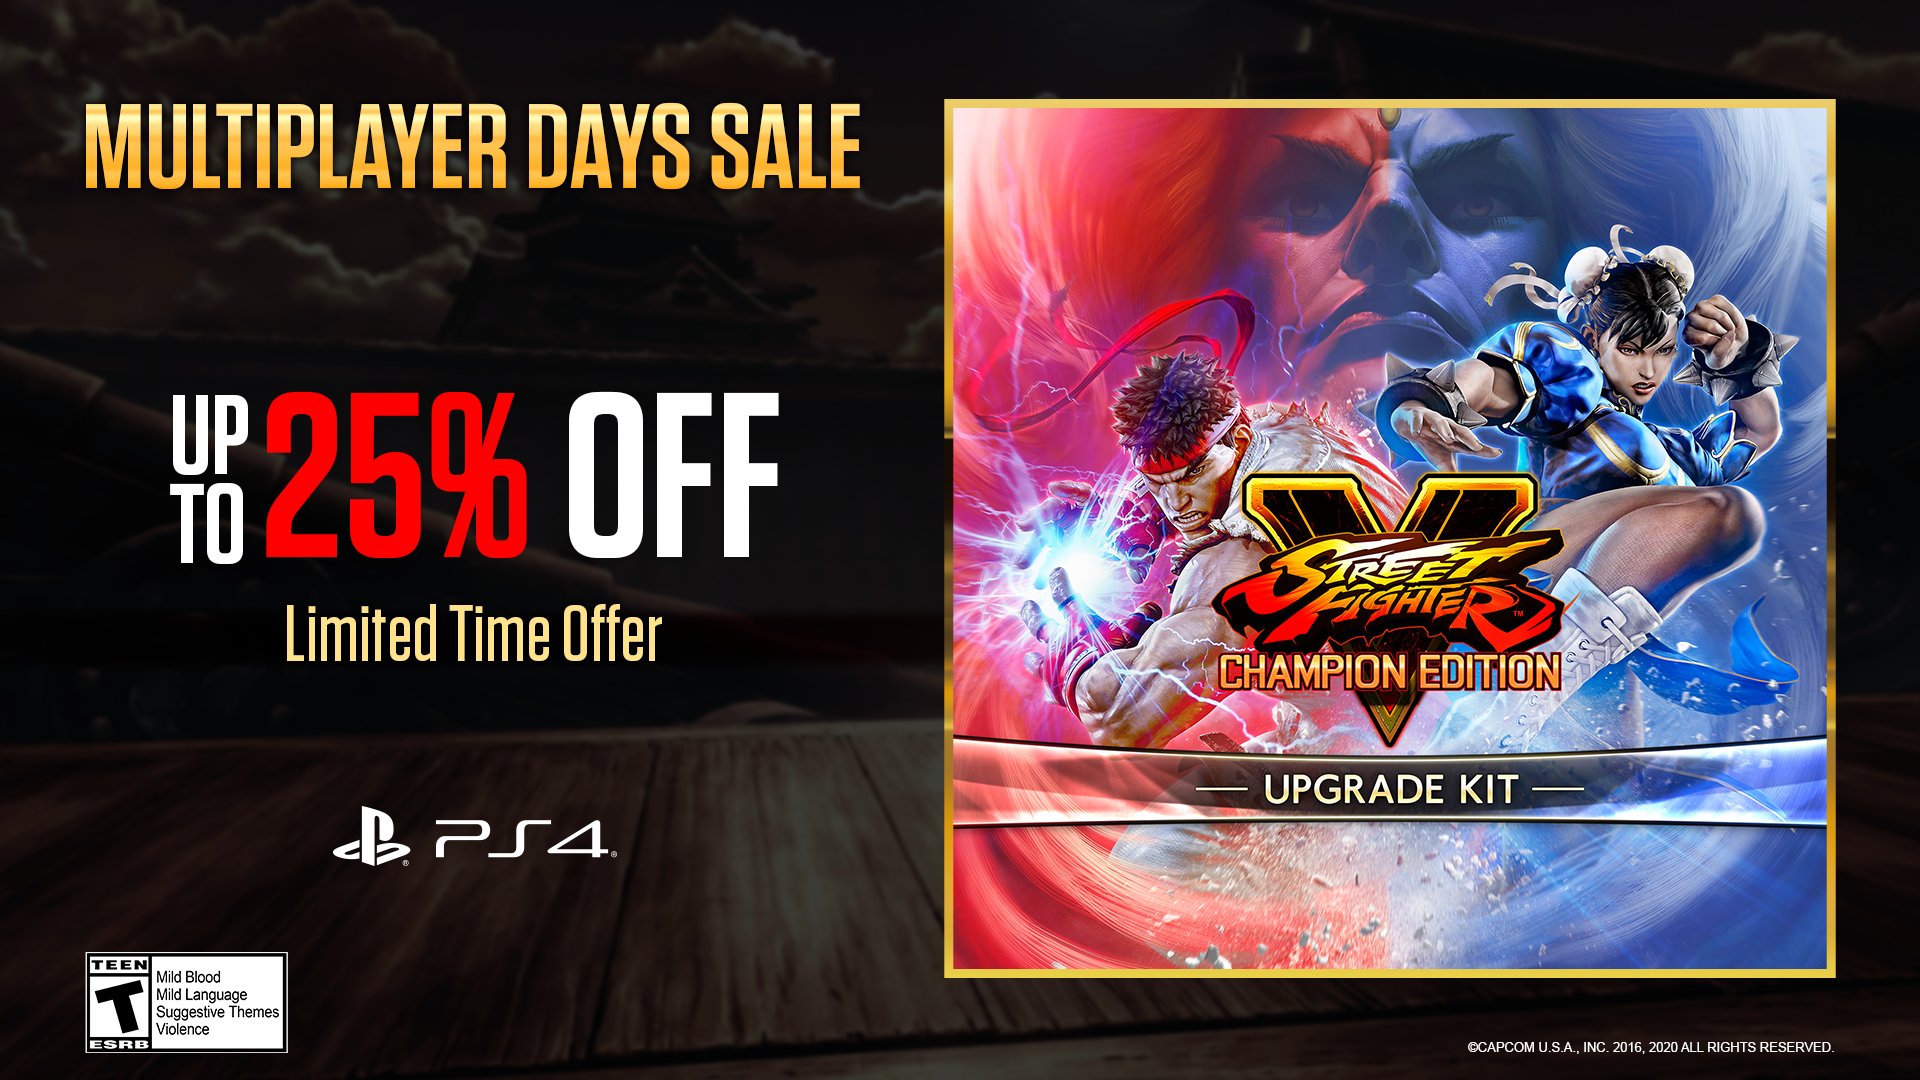 Street Fighter on Twitter: "Rule the ring, with your friends! The Street  Fighter V: Champion Edition Upgrade Kit is 25% OFF as a part of @ PlayStation's Multiplayer Days Sale on #PS4! #SFVCE